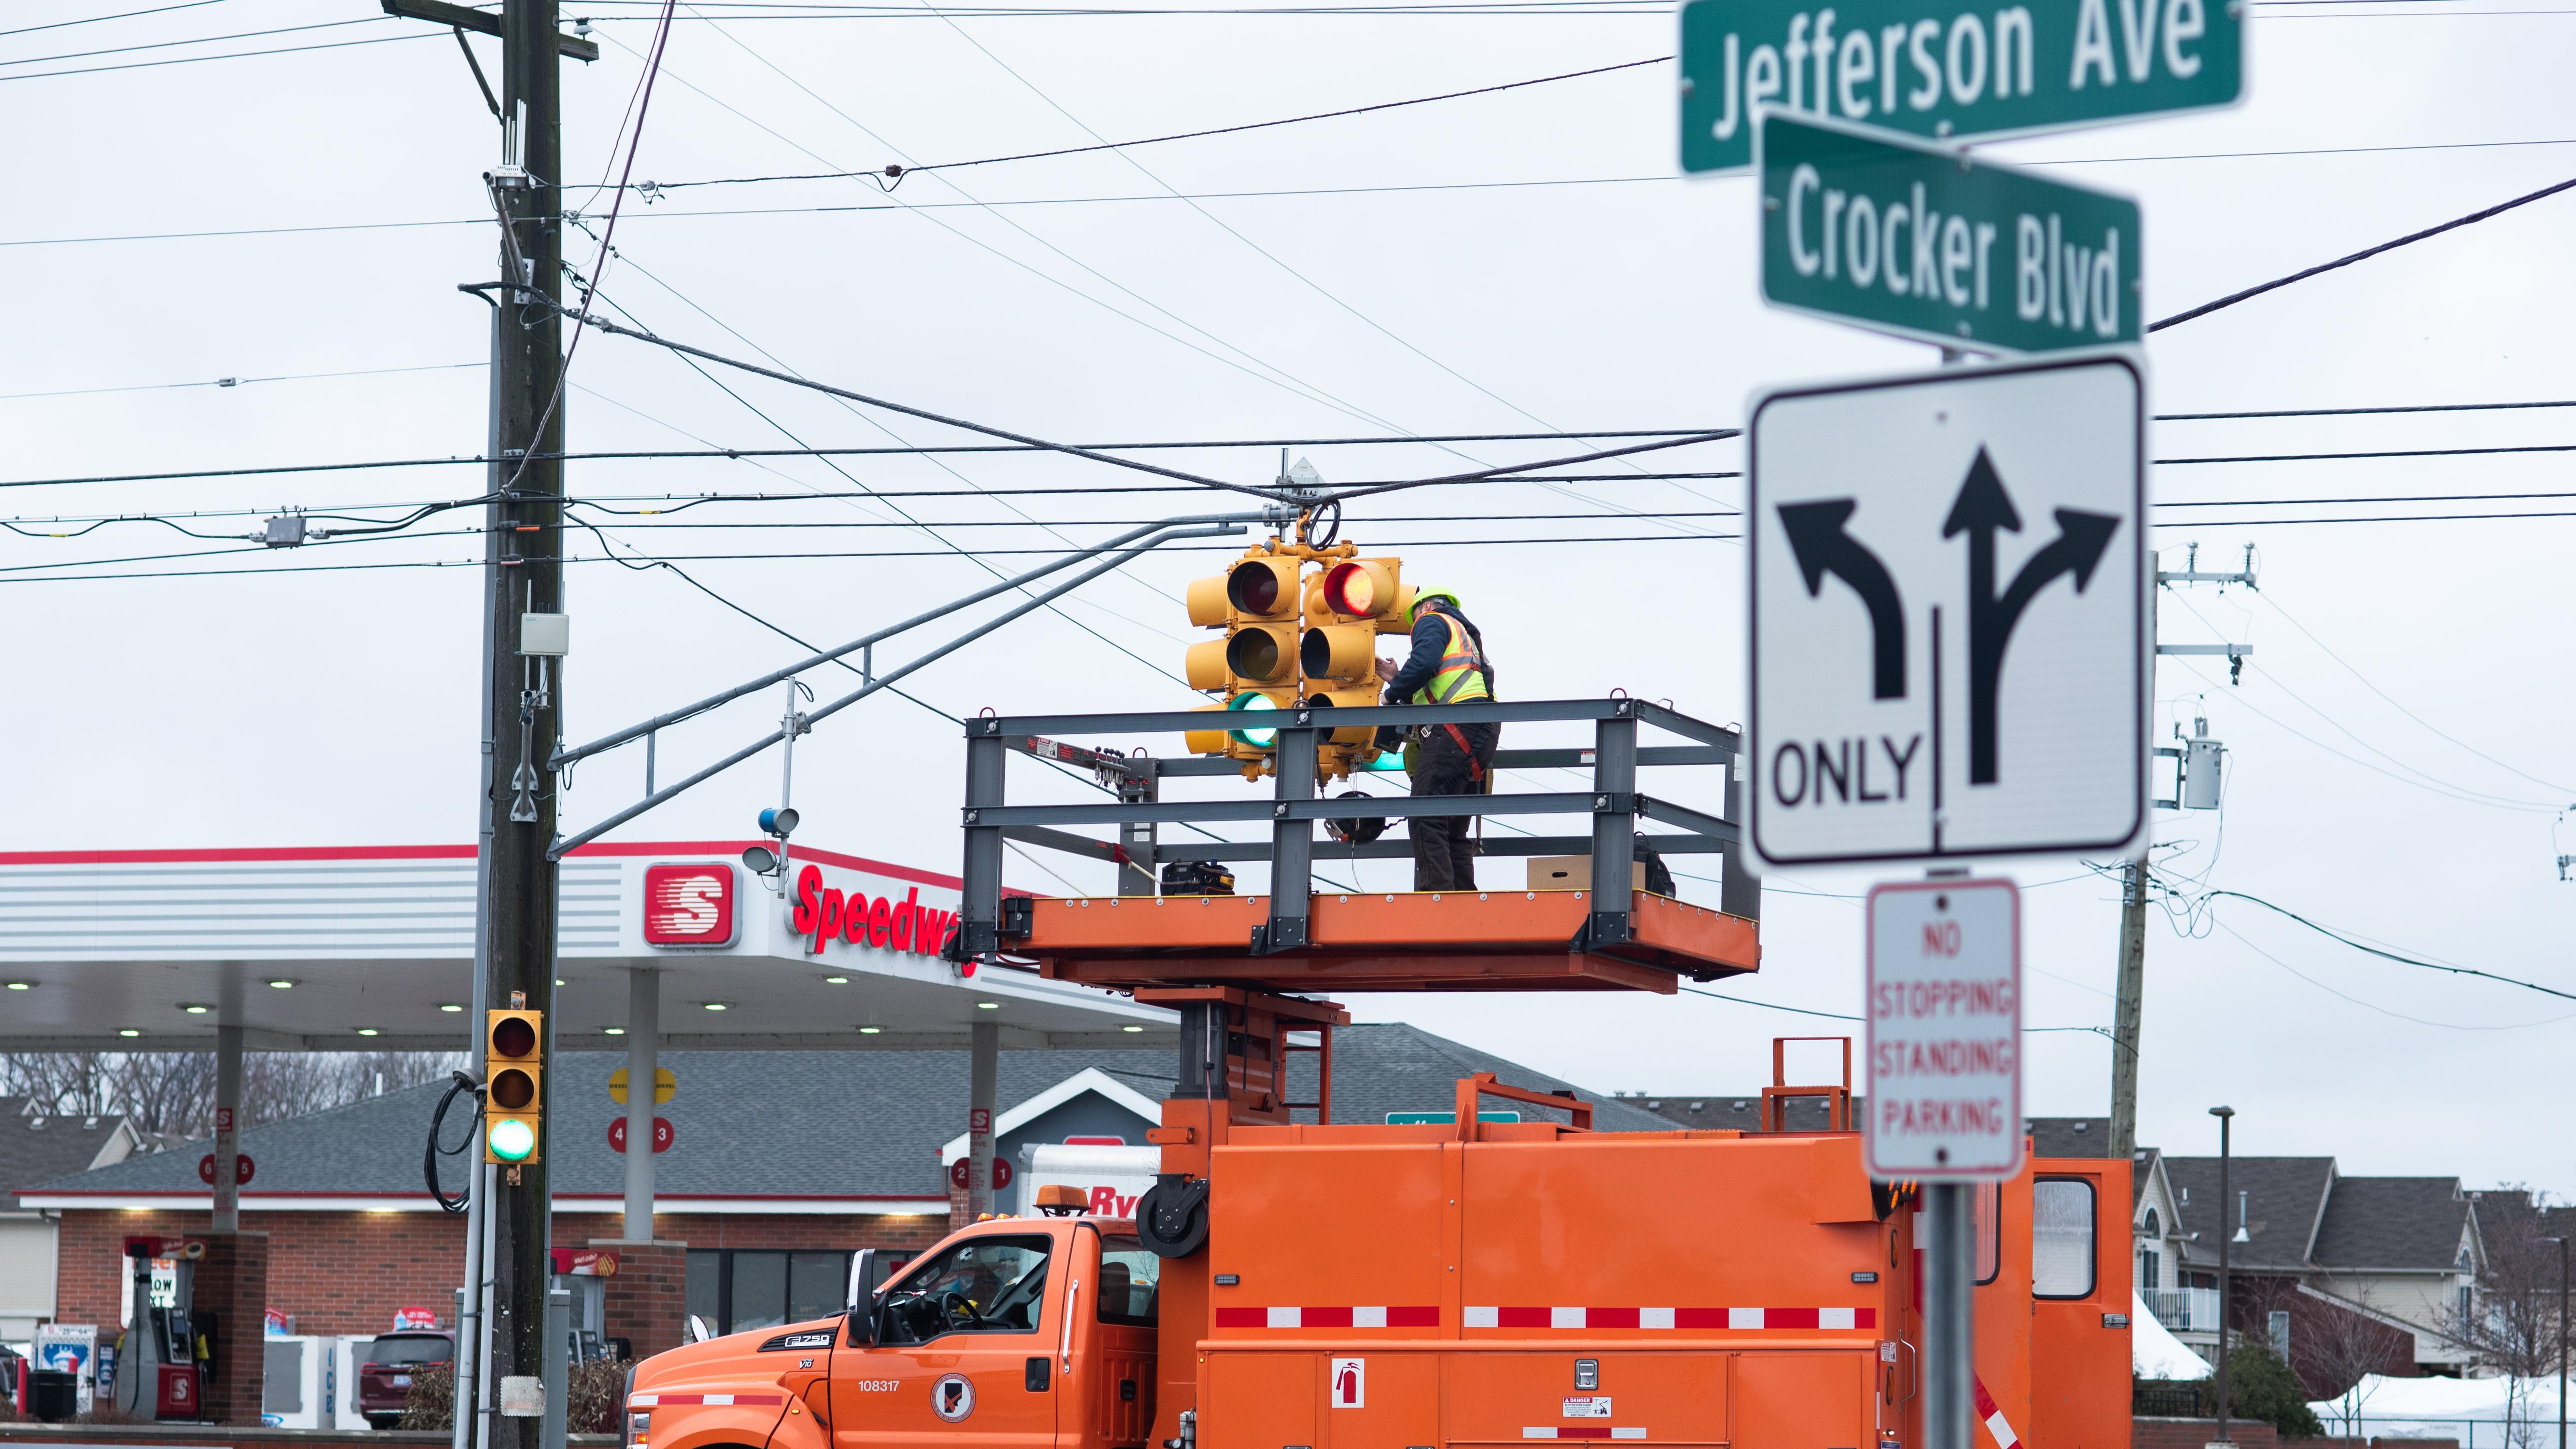 Macomb County Department of Roads personnel install traffic signal heating technology at Crocker Boulevard and Jefferson Avenue